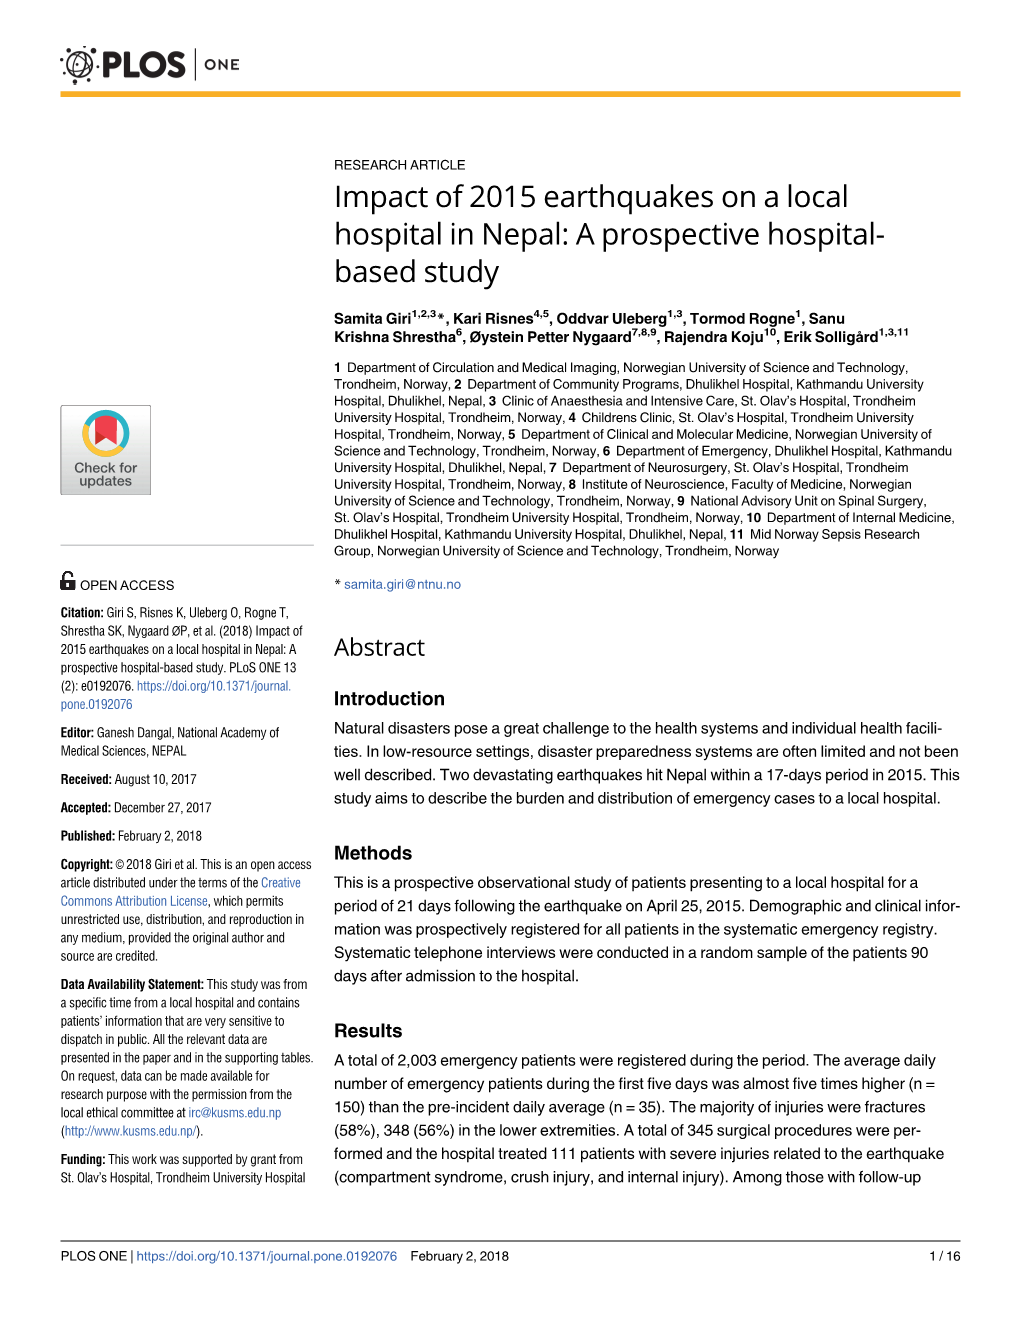 Impact of 2015 Earthquakes on a Local Hospital in Nepal: a Prospective Hospital- Based Study